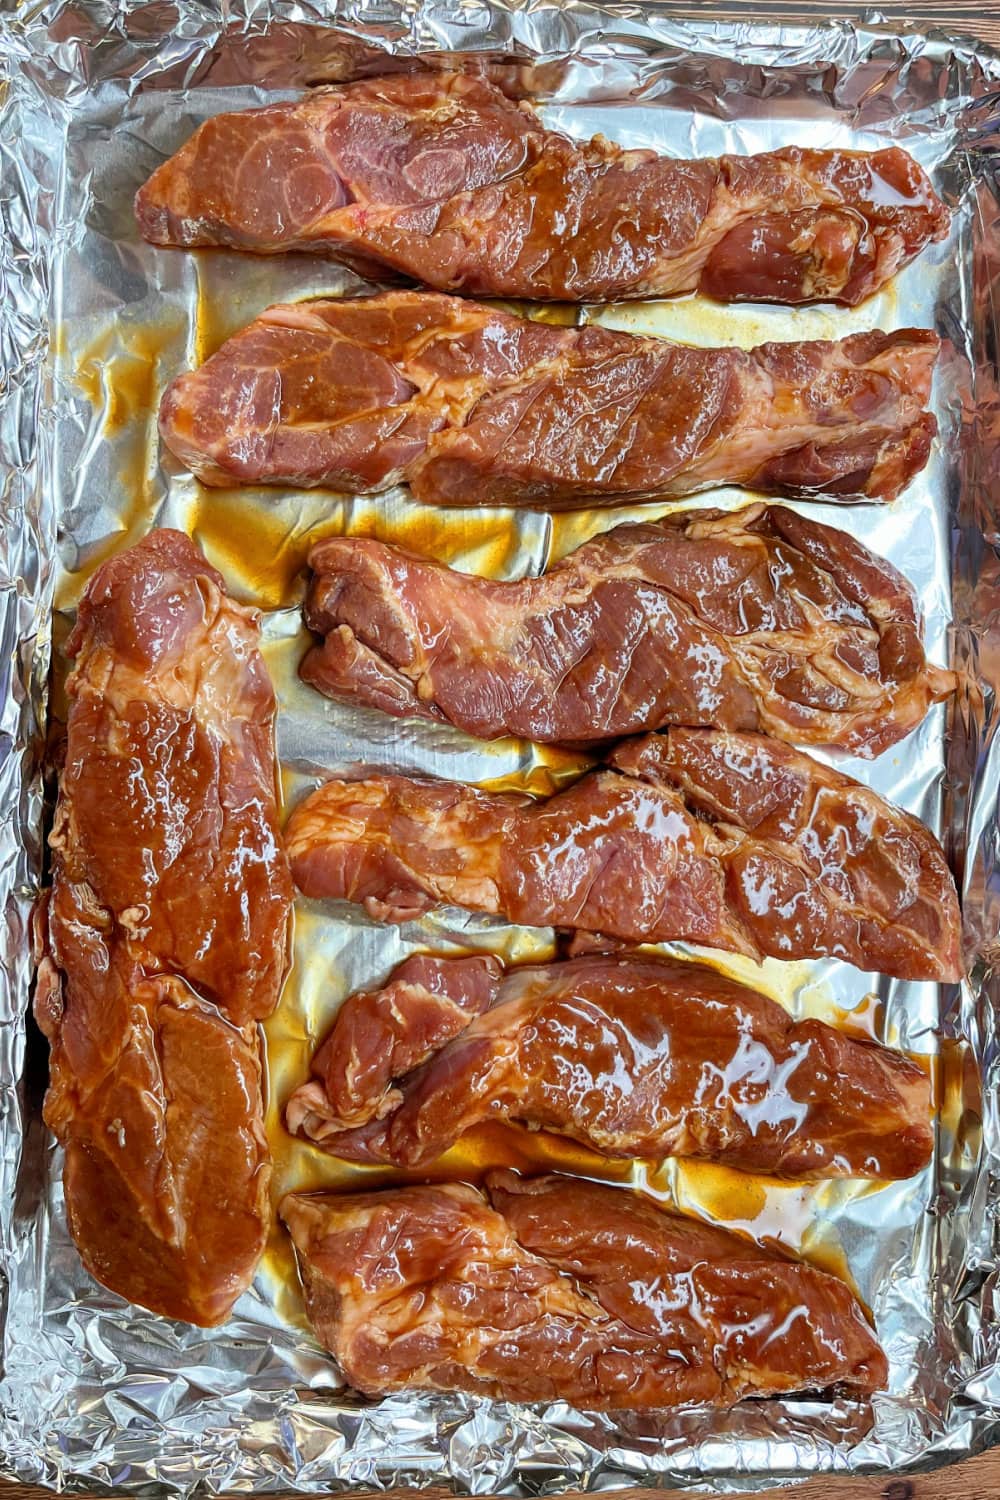 Country style pork ribs on a baking sheet lined with foil .